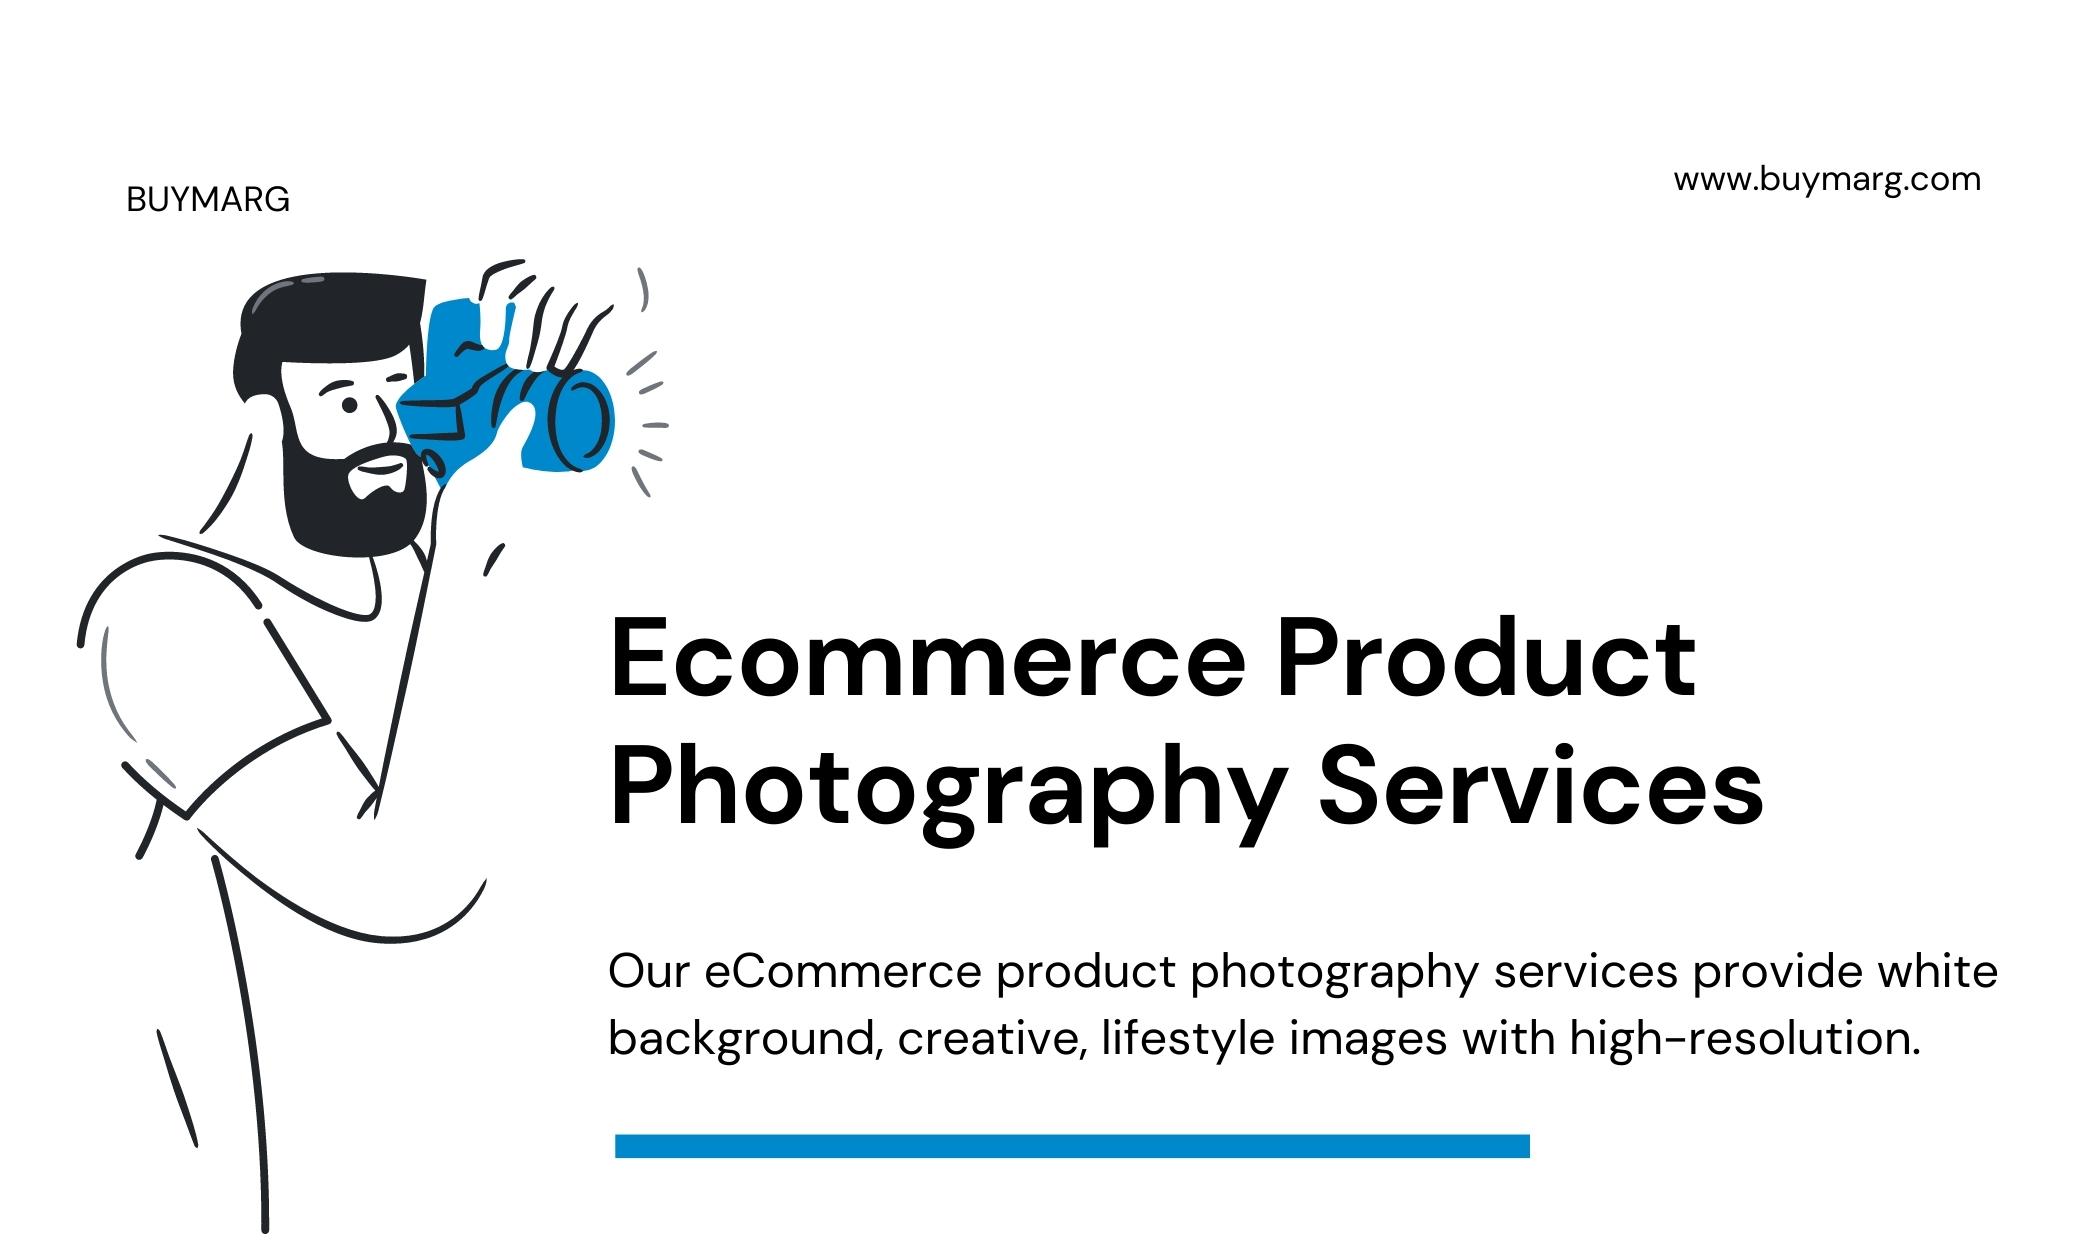 Ecommerce Product Photography Services